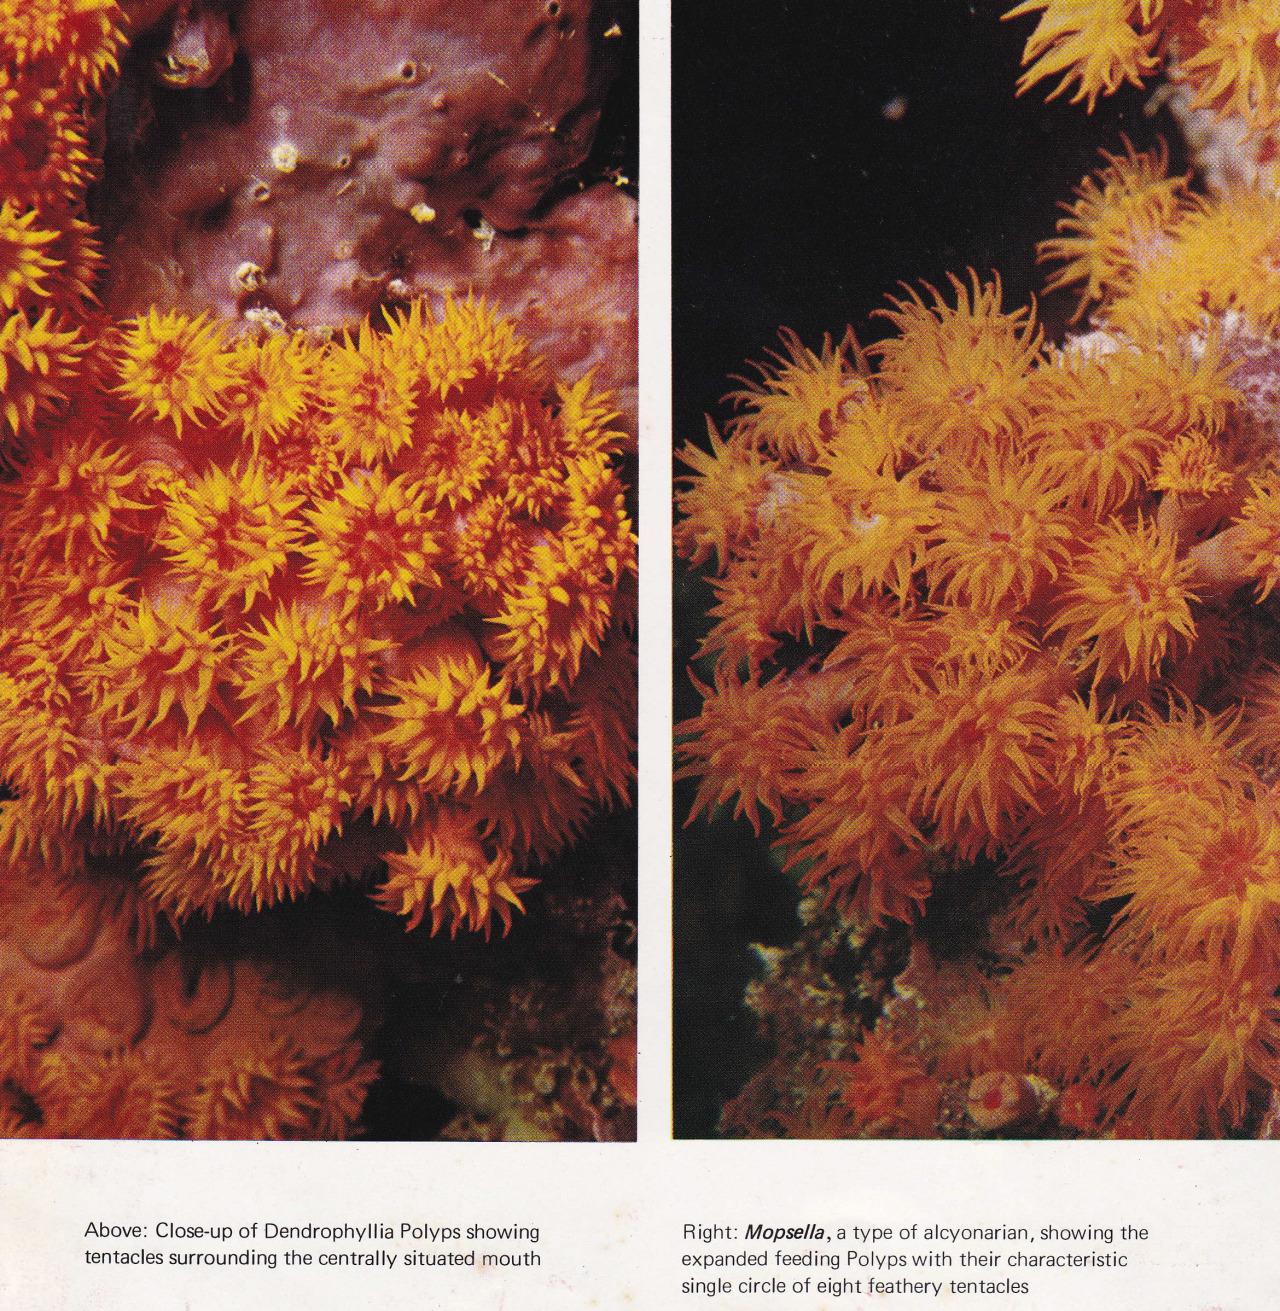 plant-scans:
The Great Barrier Reef, Allan Power 1969
